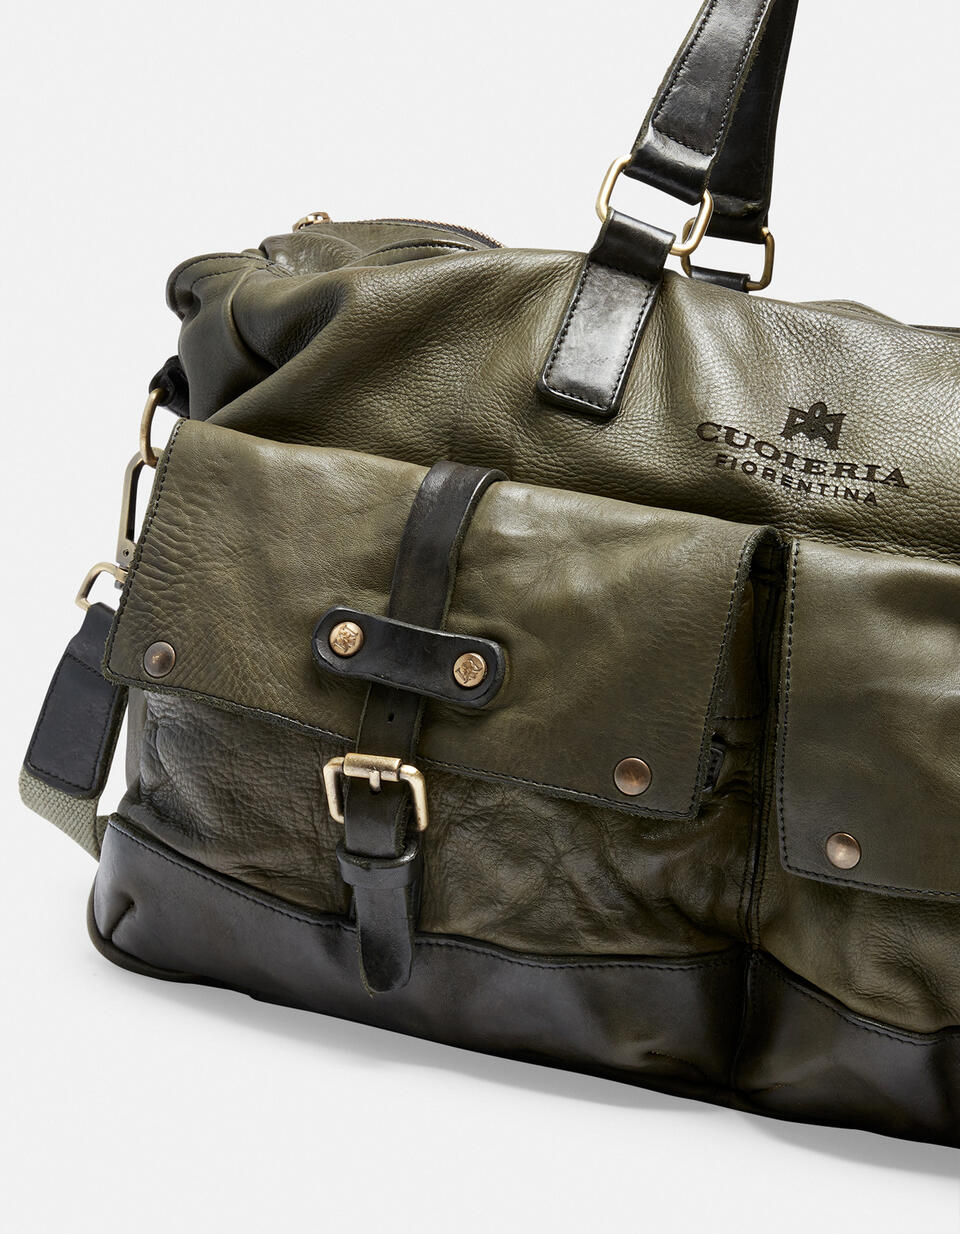 Millennial weekender bag - Luggage | TRAVEL BAGS FORESTA - Luggage | TRAVEL BAGSCuoieria Fiorentina